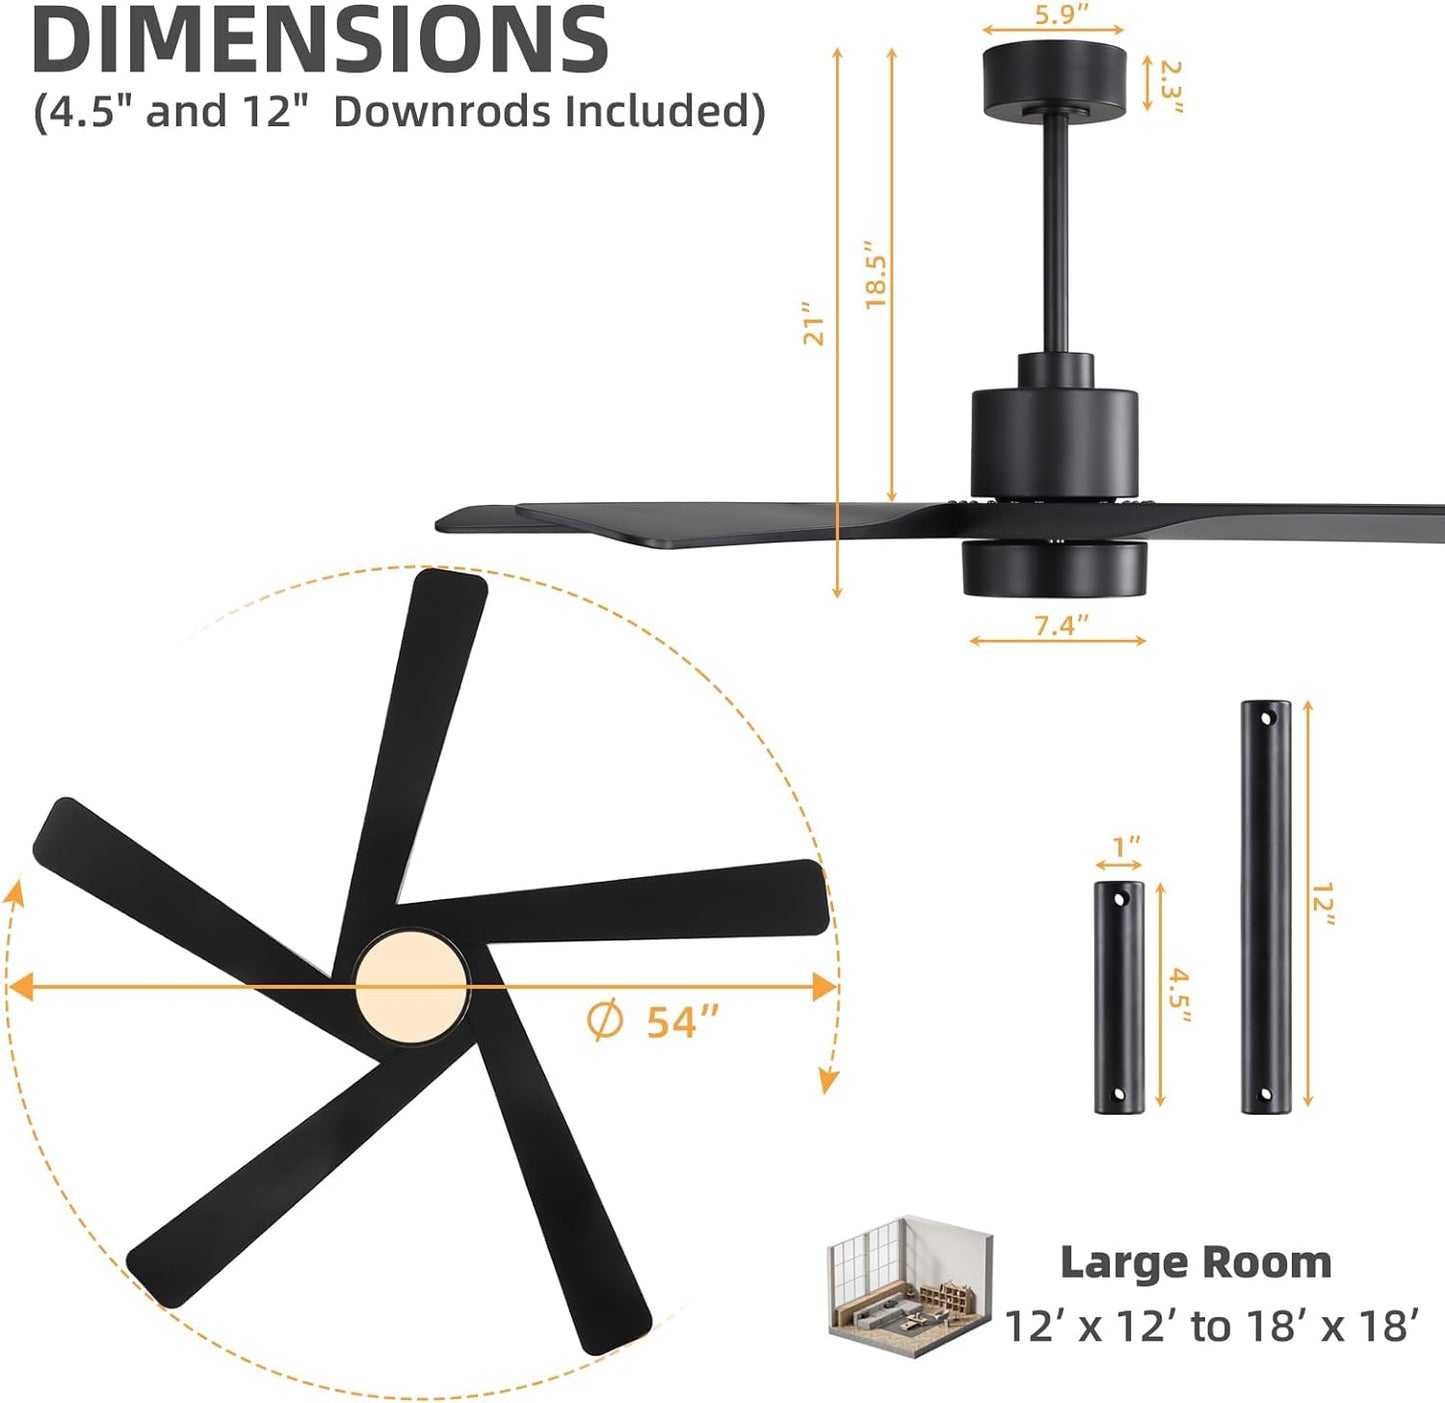 WINGBO 54" ABS DC Ceiling Fan with Lights, 5 Blade ABS Plastic Ceiling Fan with Remote, 6-Speed Reversible DC Motor, LED Ceiling Fan for Kitchen Bedroom Living Room, Matte Black